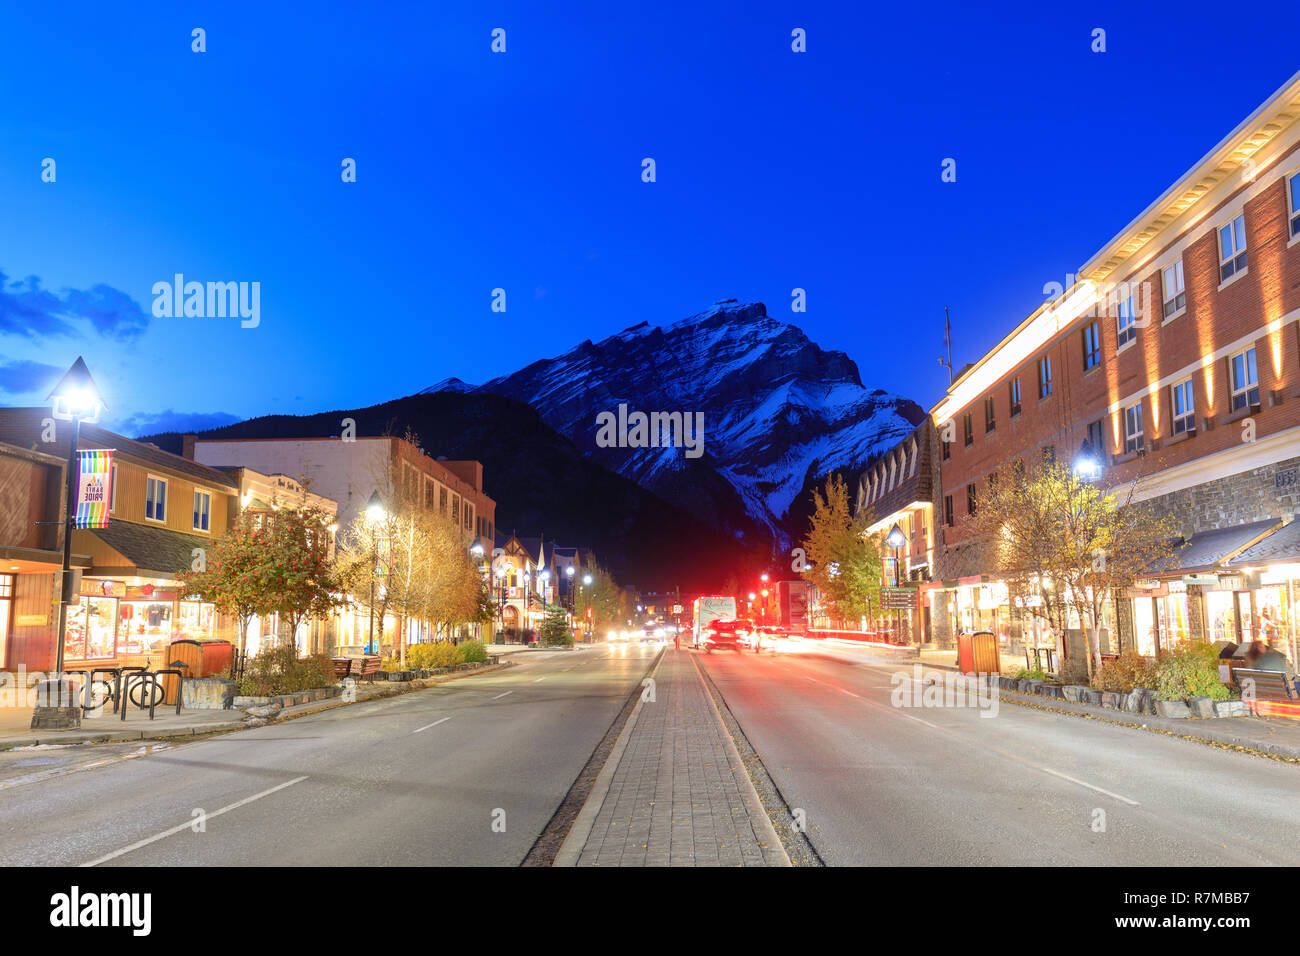 Alberta, Canada - October 7, 2018 : Downtown Banff with Cascade Mountain at night, Banff National Park Stock Photo